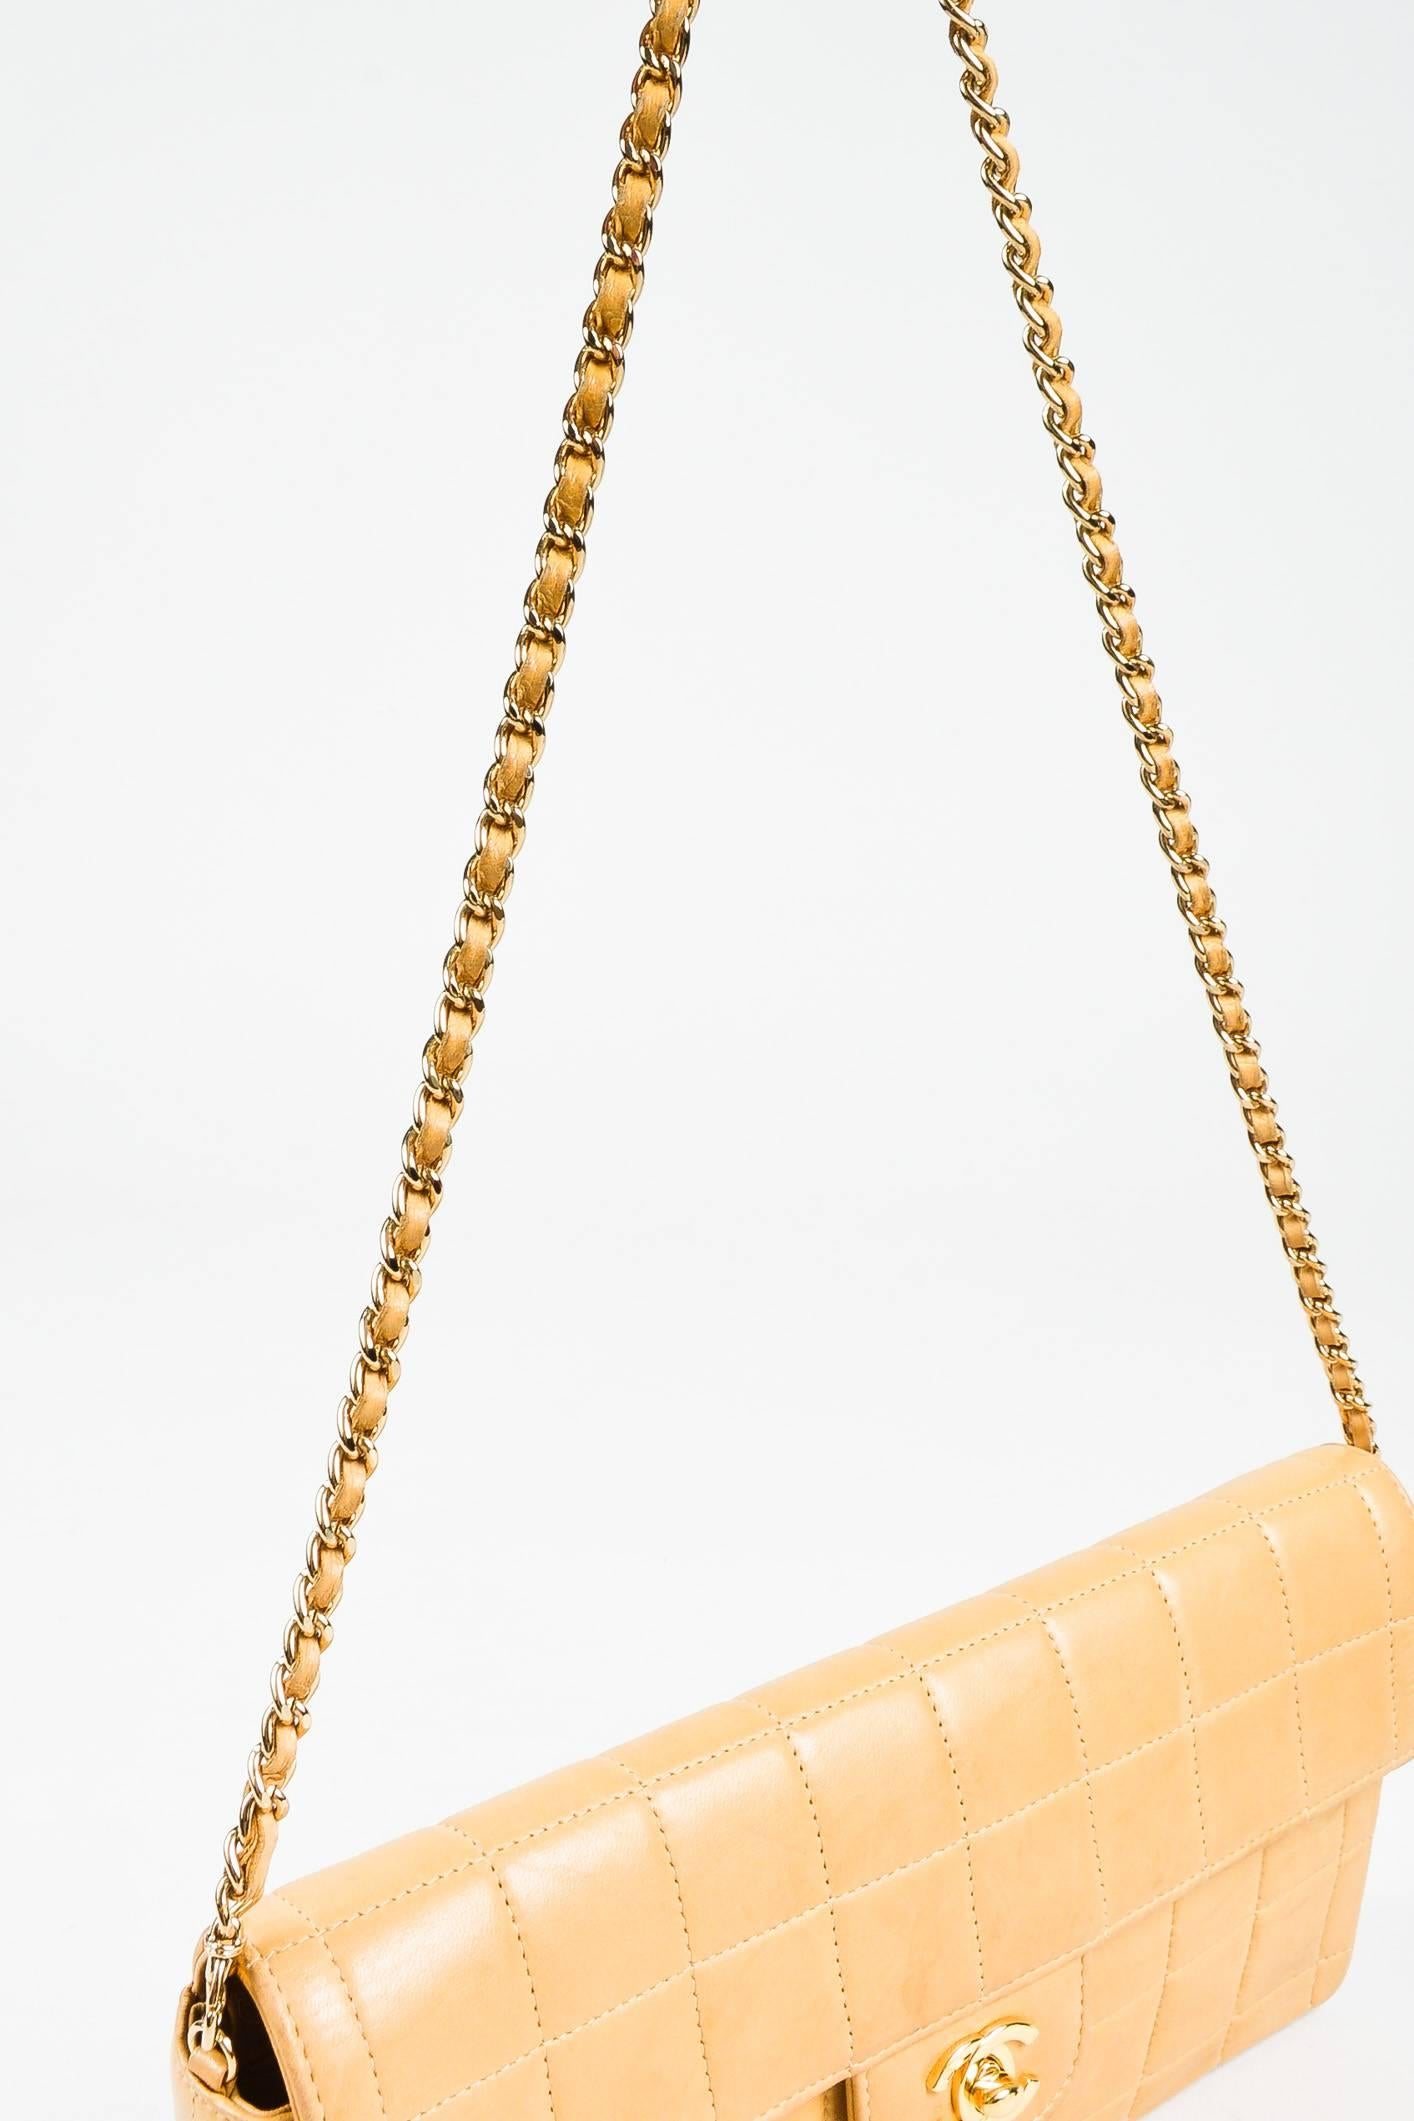 Chanel Tan Leather Quilted Gold Chain 